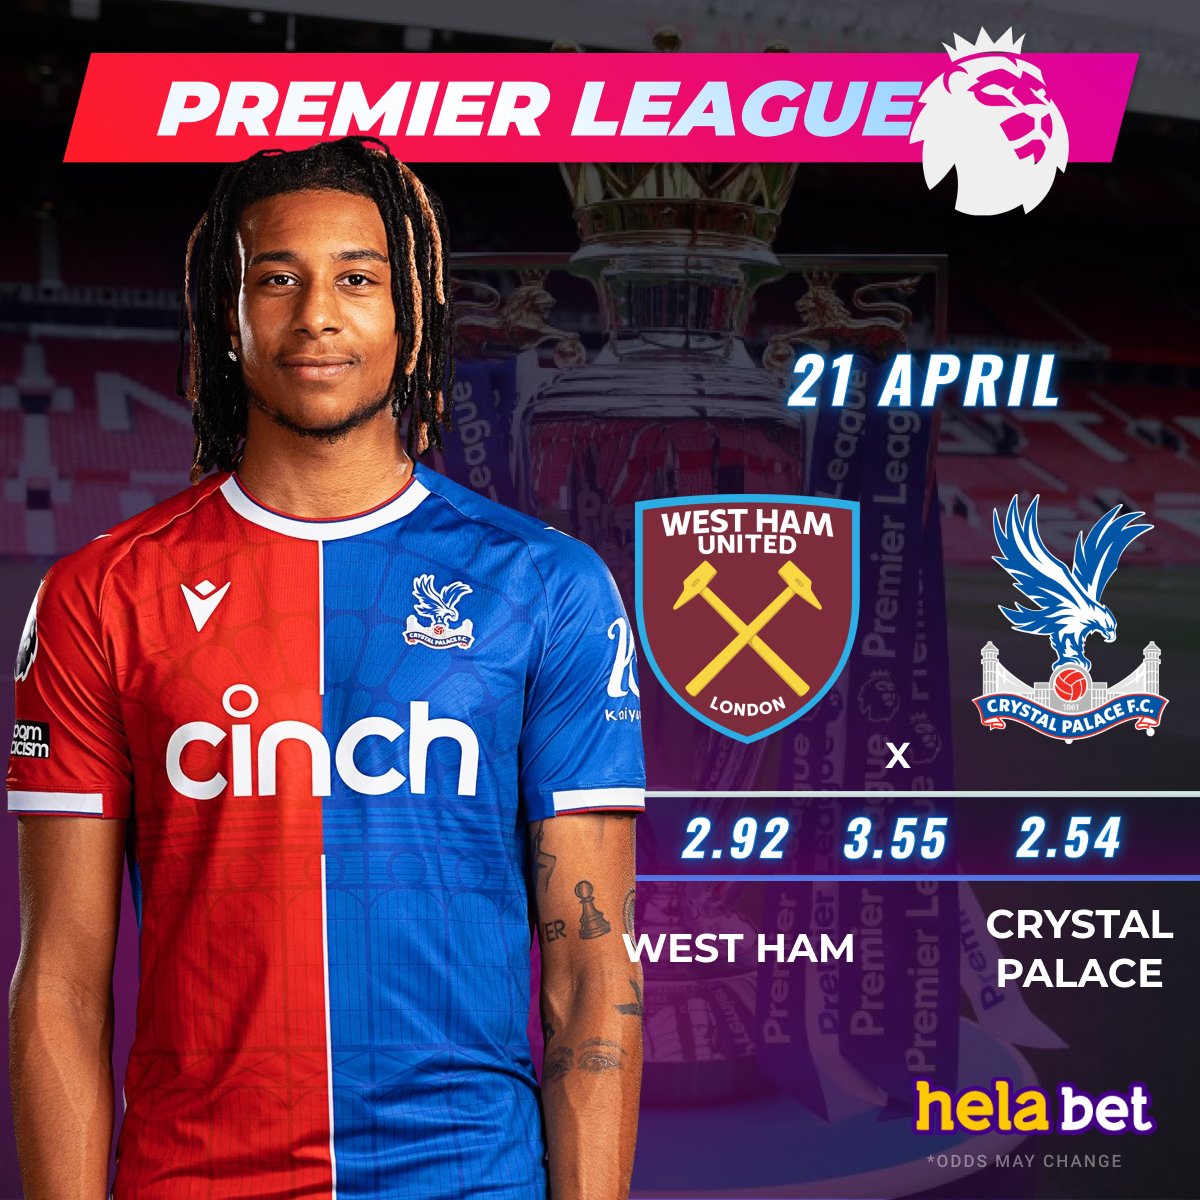 🇬🇧 Premier League 🦁 ⚽ West Ham vs Crystal Palace 👉 In the last three head-to-head matches, Crystal Palace did not lose to West Ham.  How will today's match end❓ 👍 Place your bet in #Helabet 👉 cutt.ly/UwY8h1uG #epl #westham #crystalpalace #premierleague